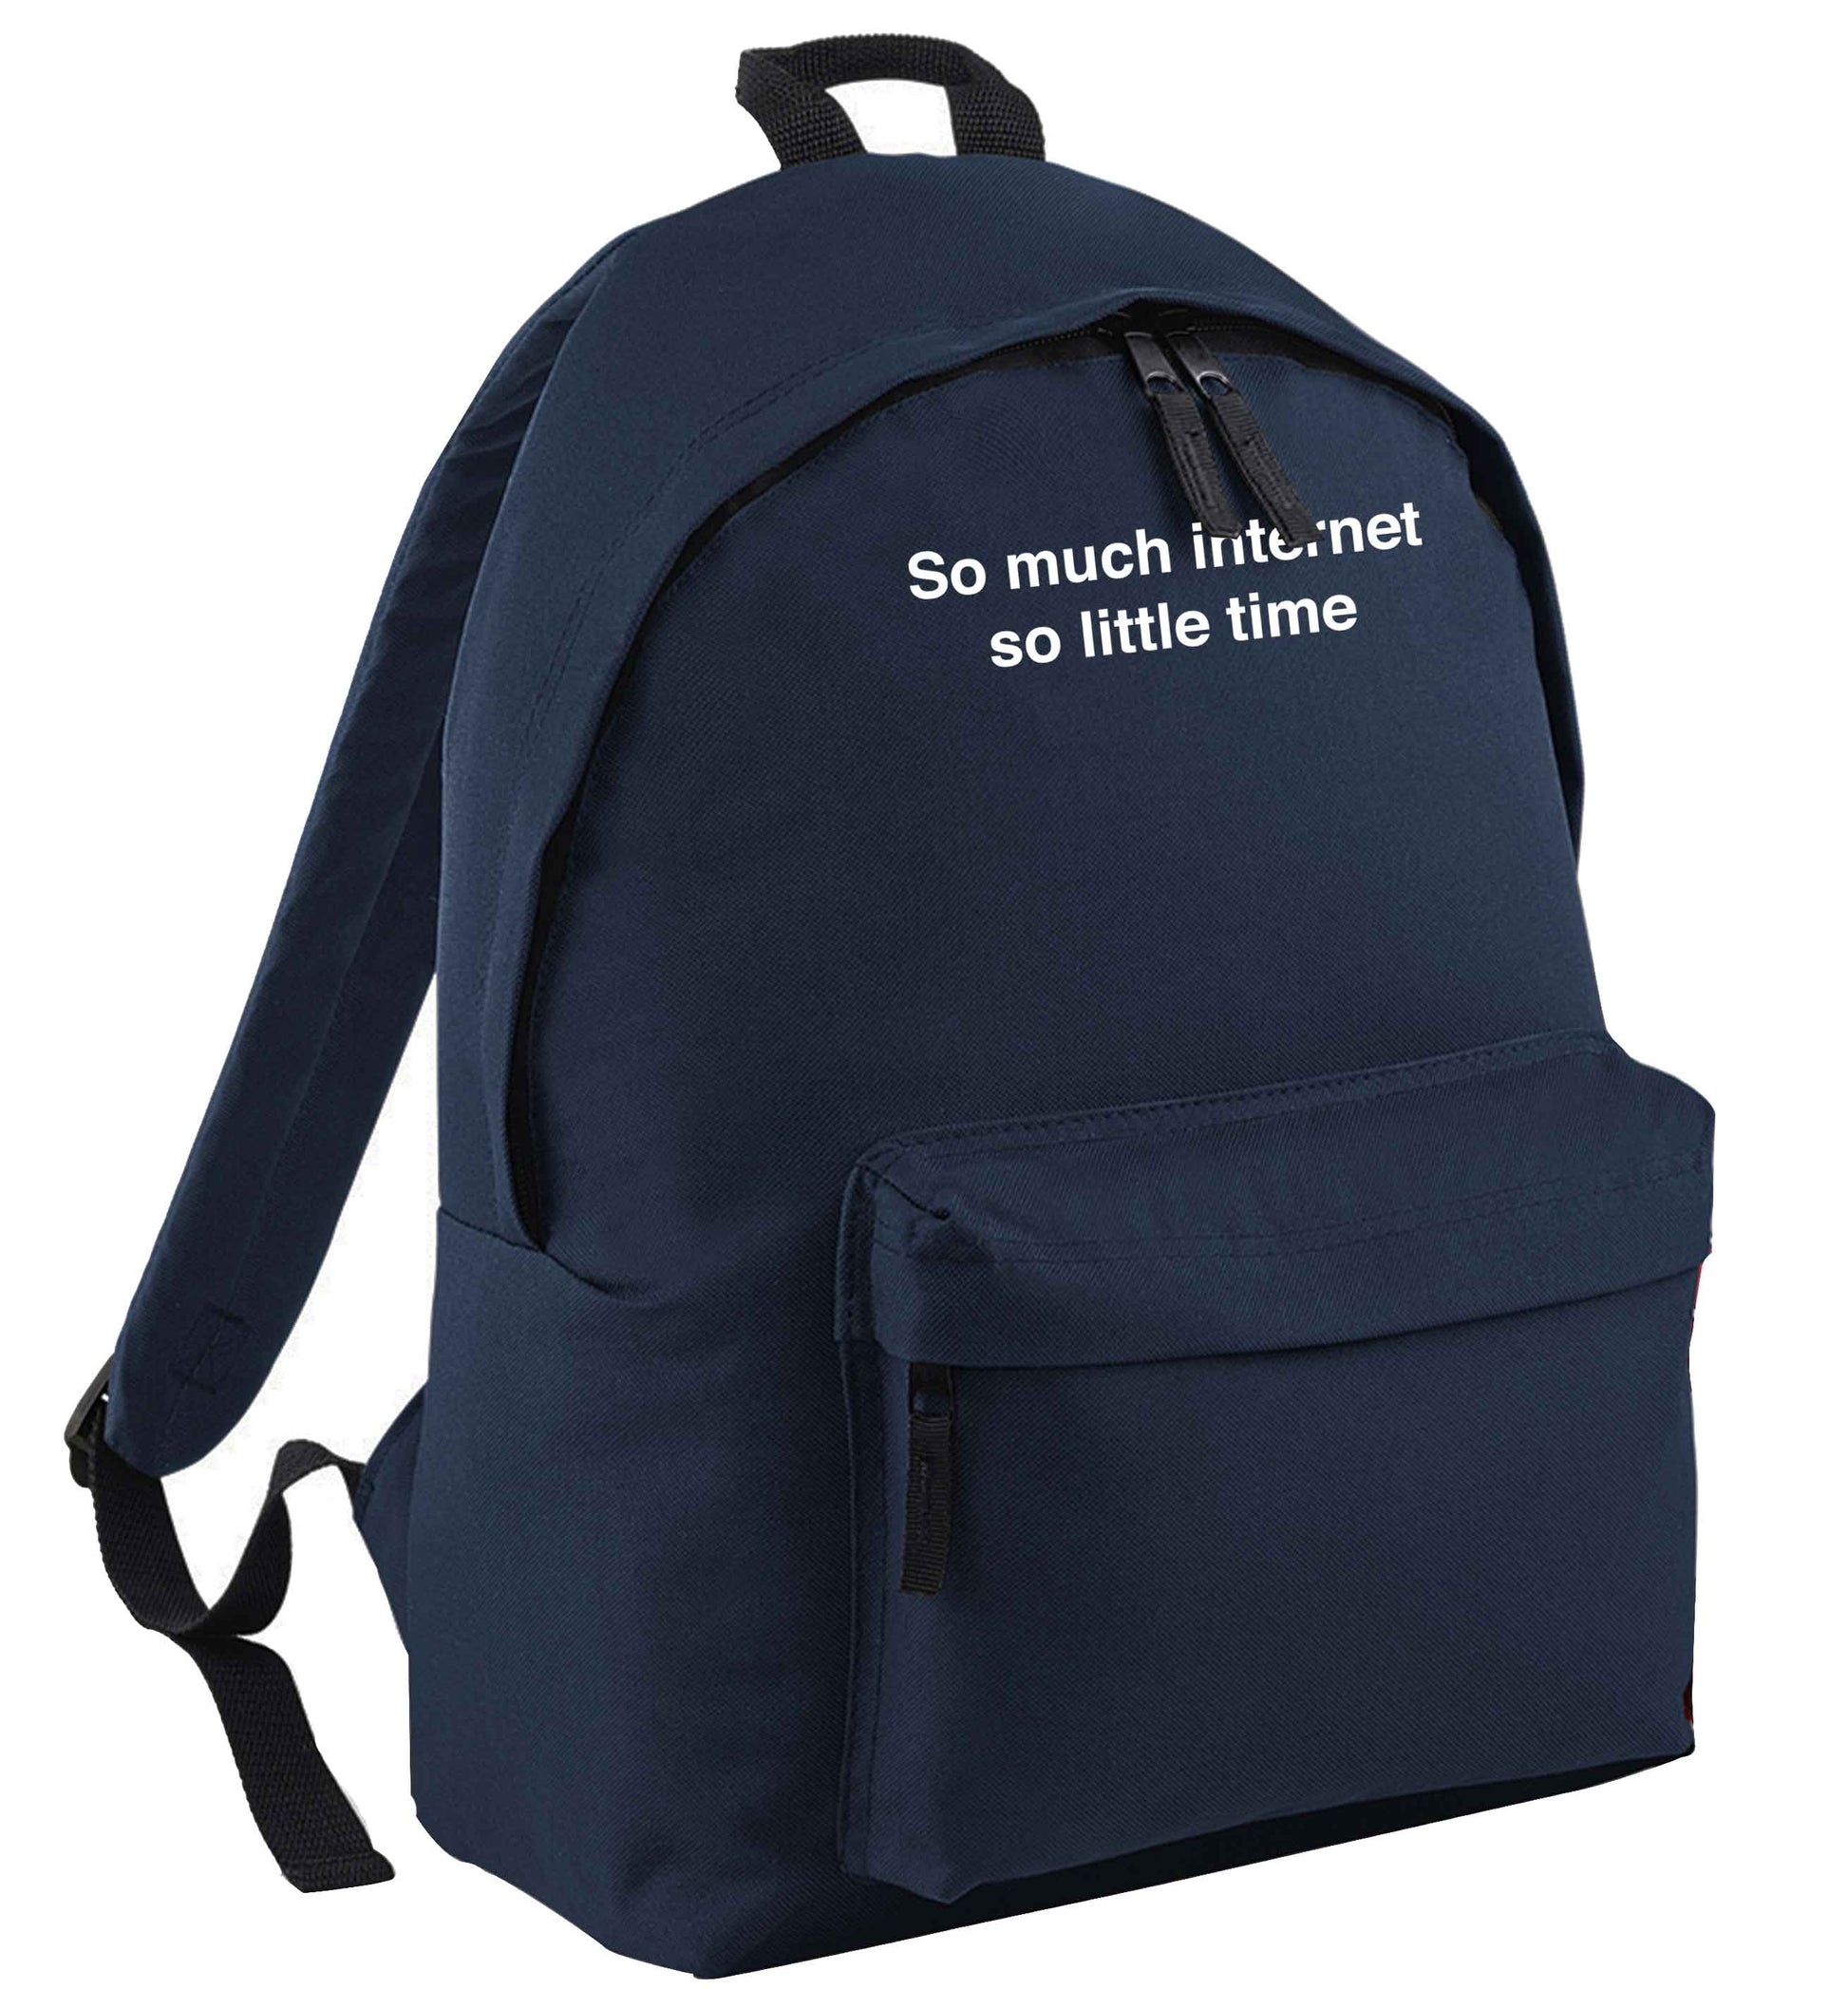 So much internet so little time navy adults backpack